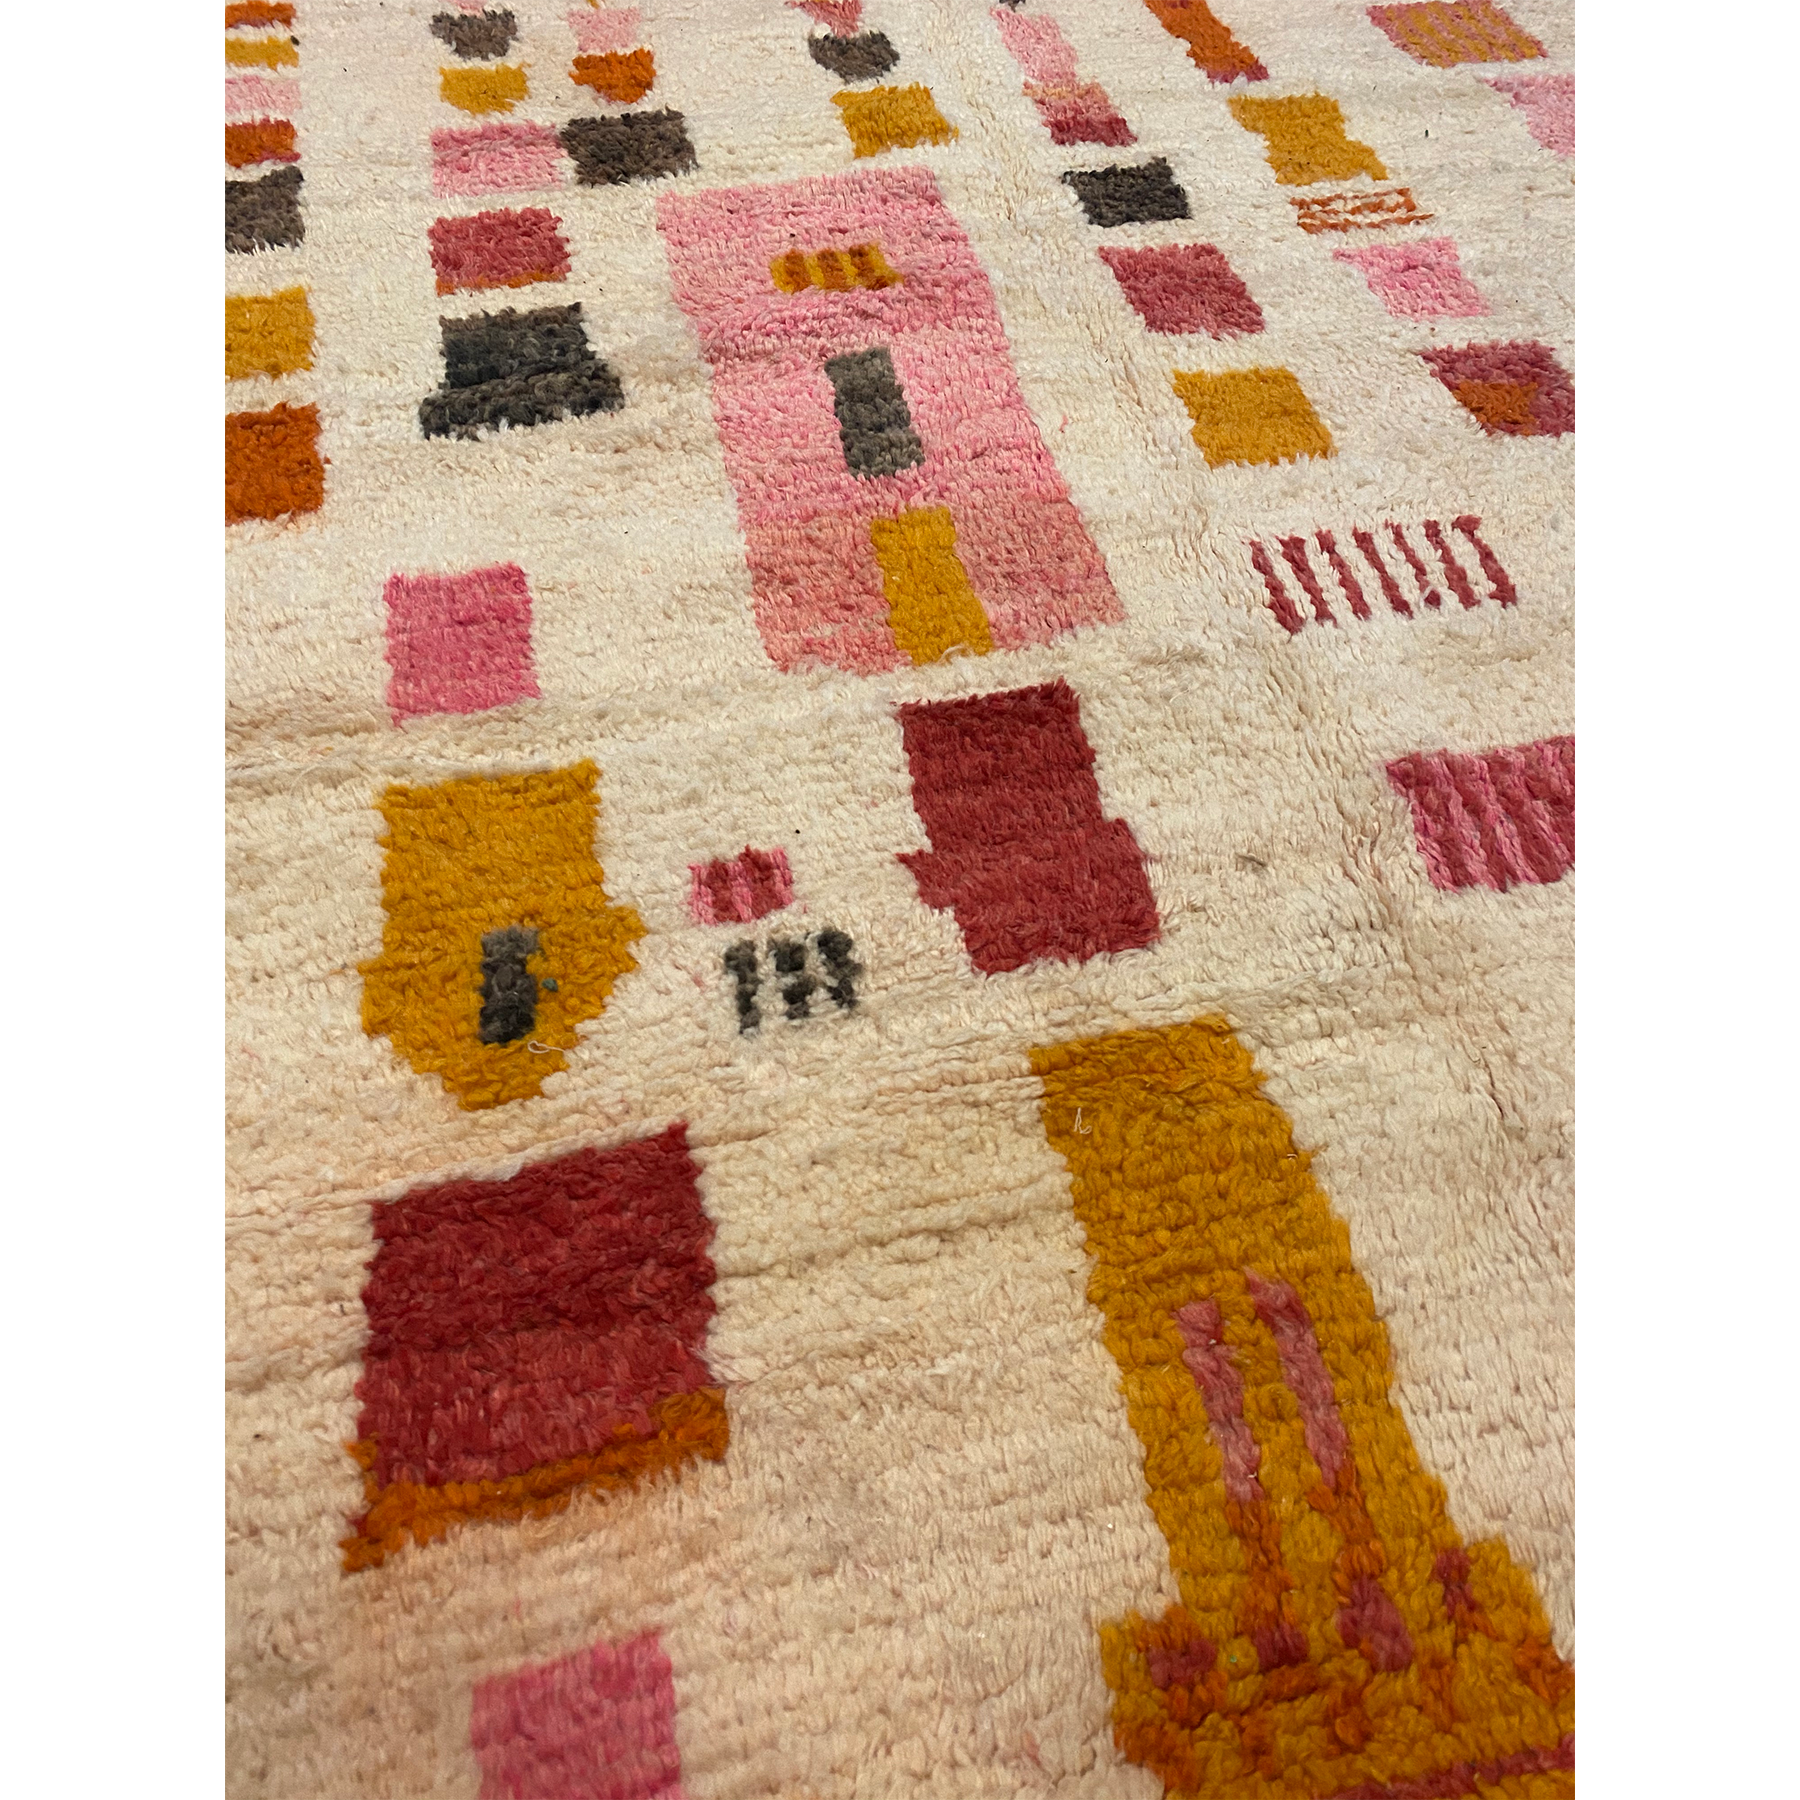 Detail of modern Moroccan rug for child's playroom or nursery